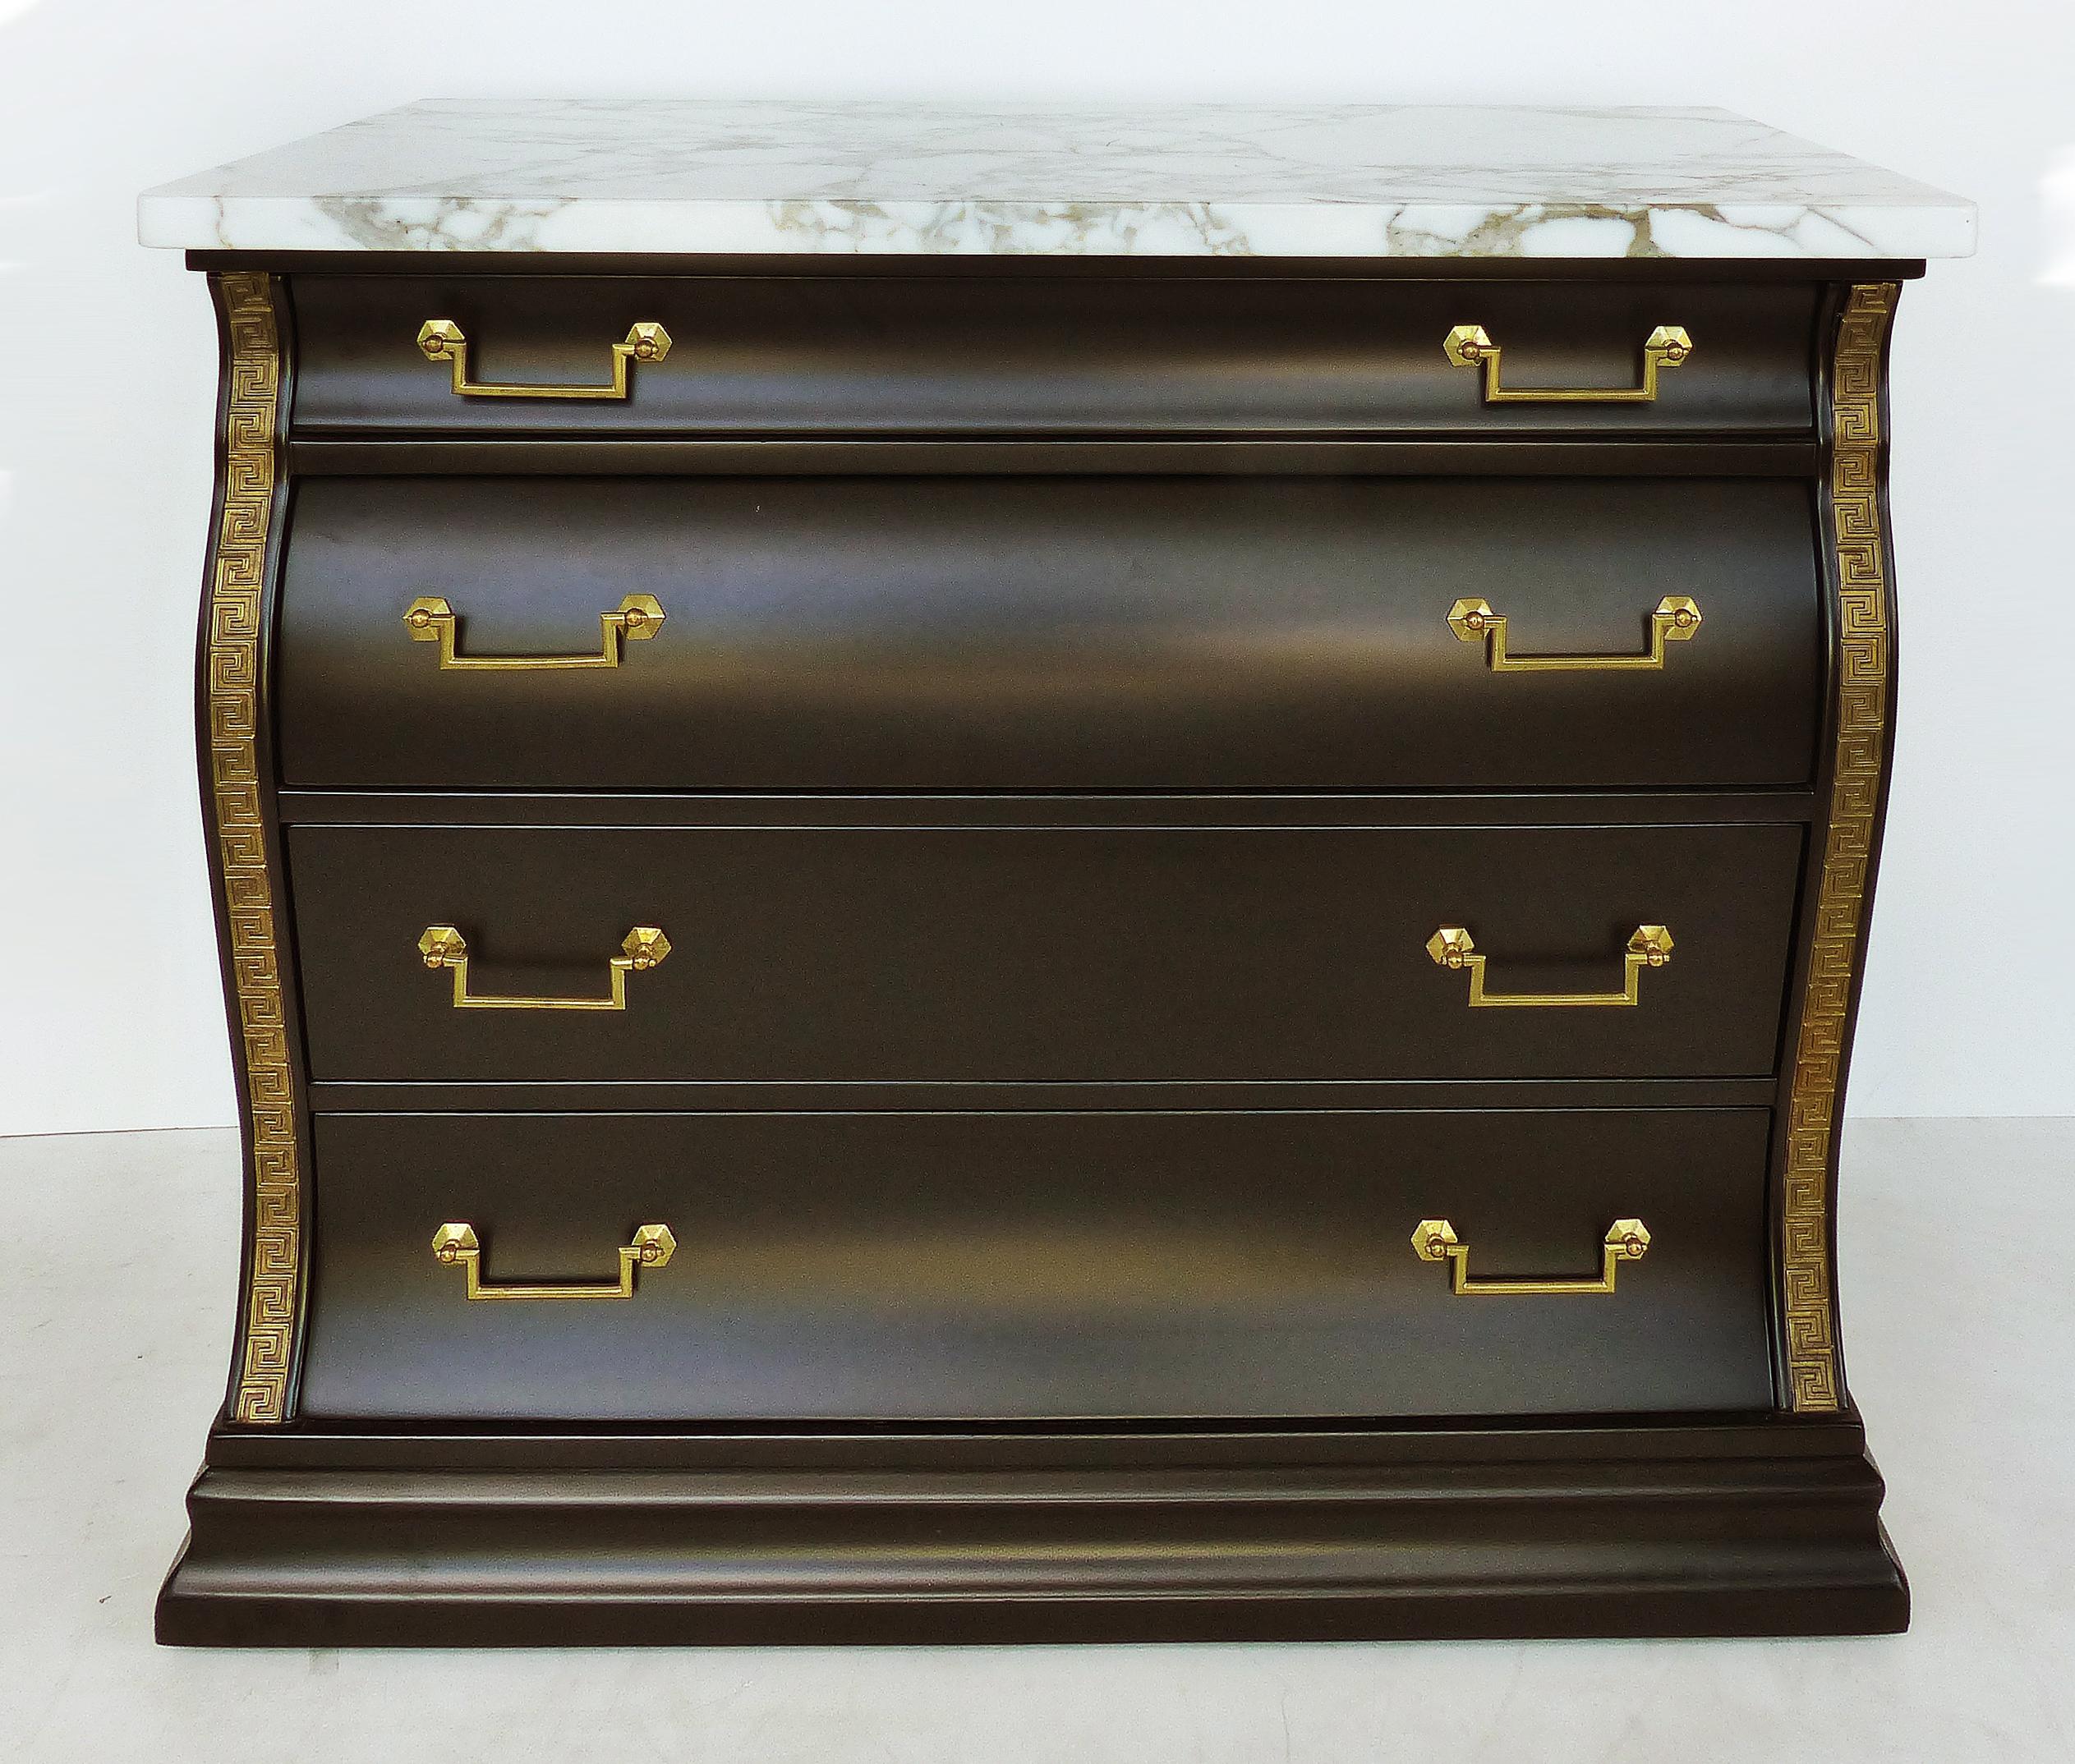 Marble Top Serpentine Front Chest of Drawers, Greek Key Brass Hardware 

Offered for sale is an elegant late 20th-century serpentine front chest of drawers with a marble top. The chest has 4 graduated drawers with brass handles and is detailed